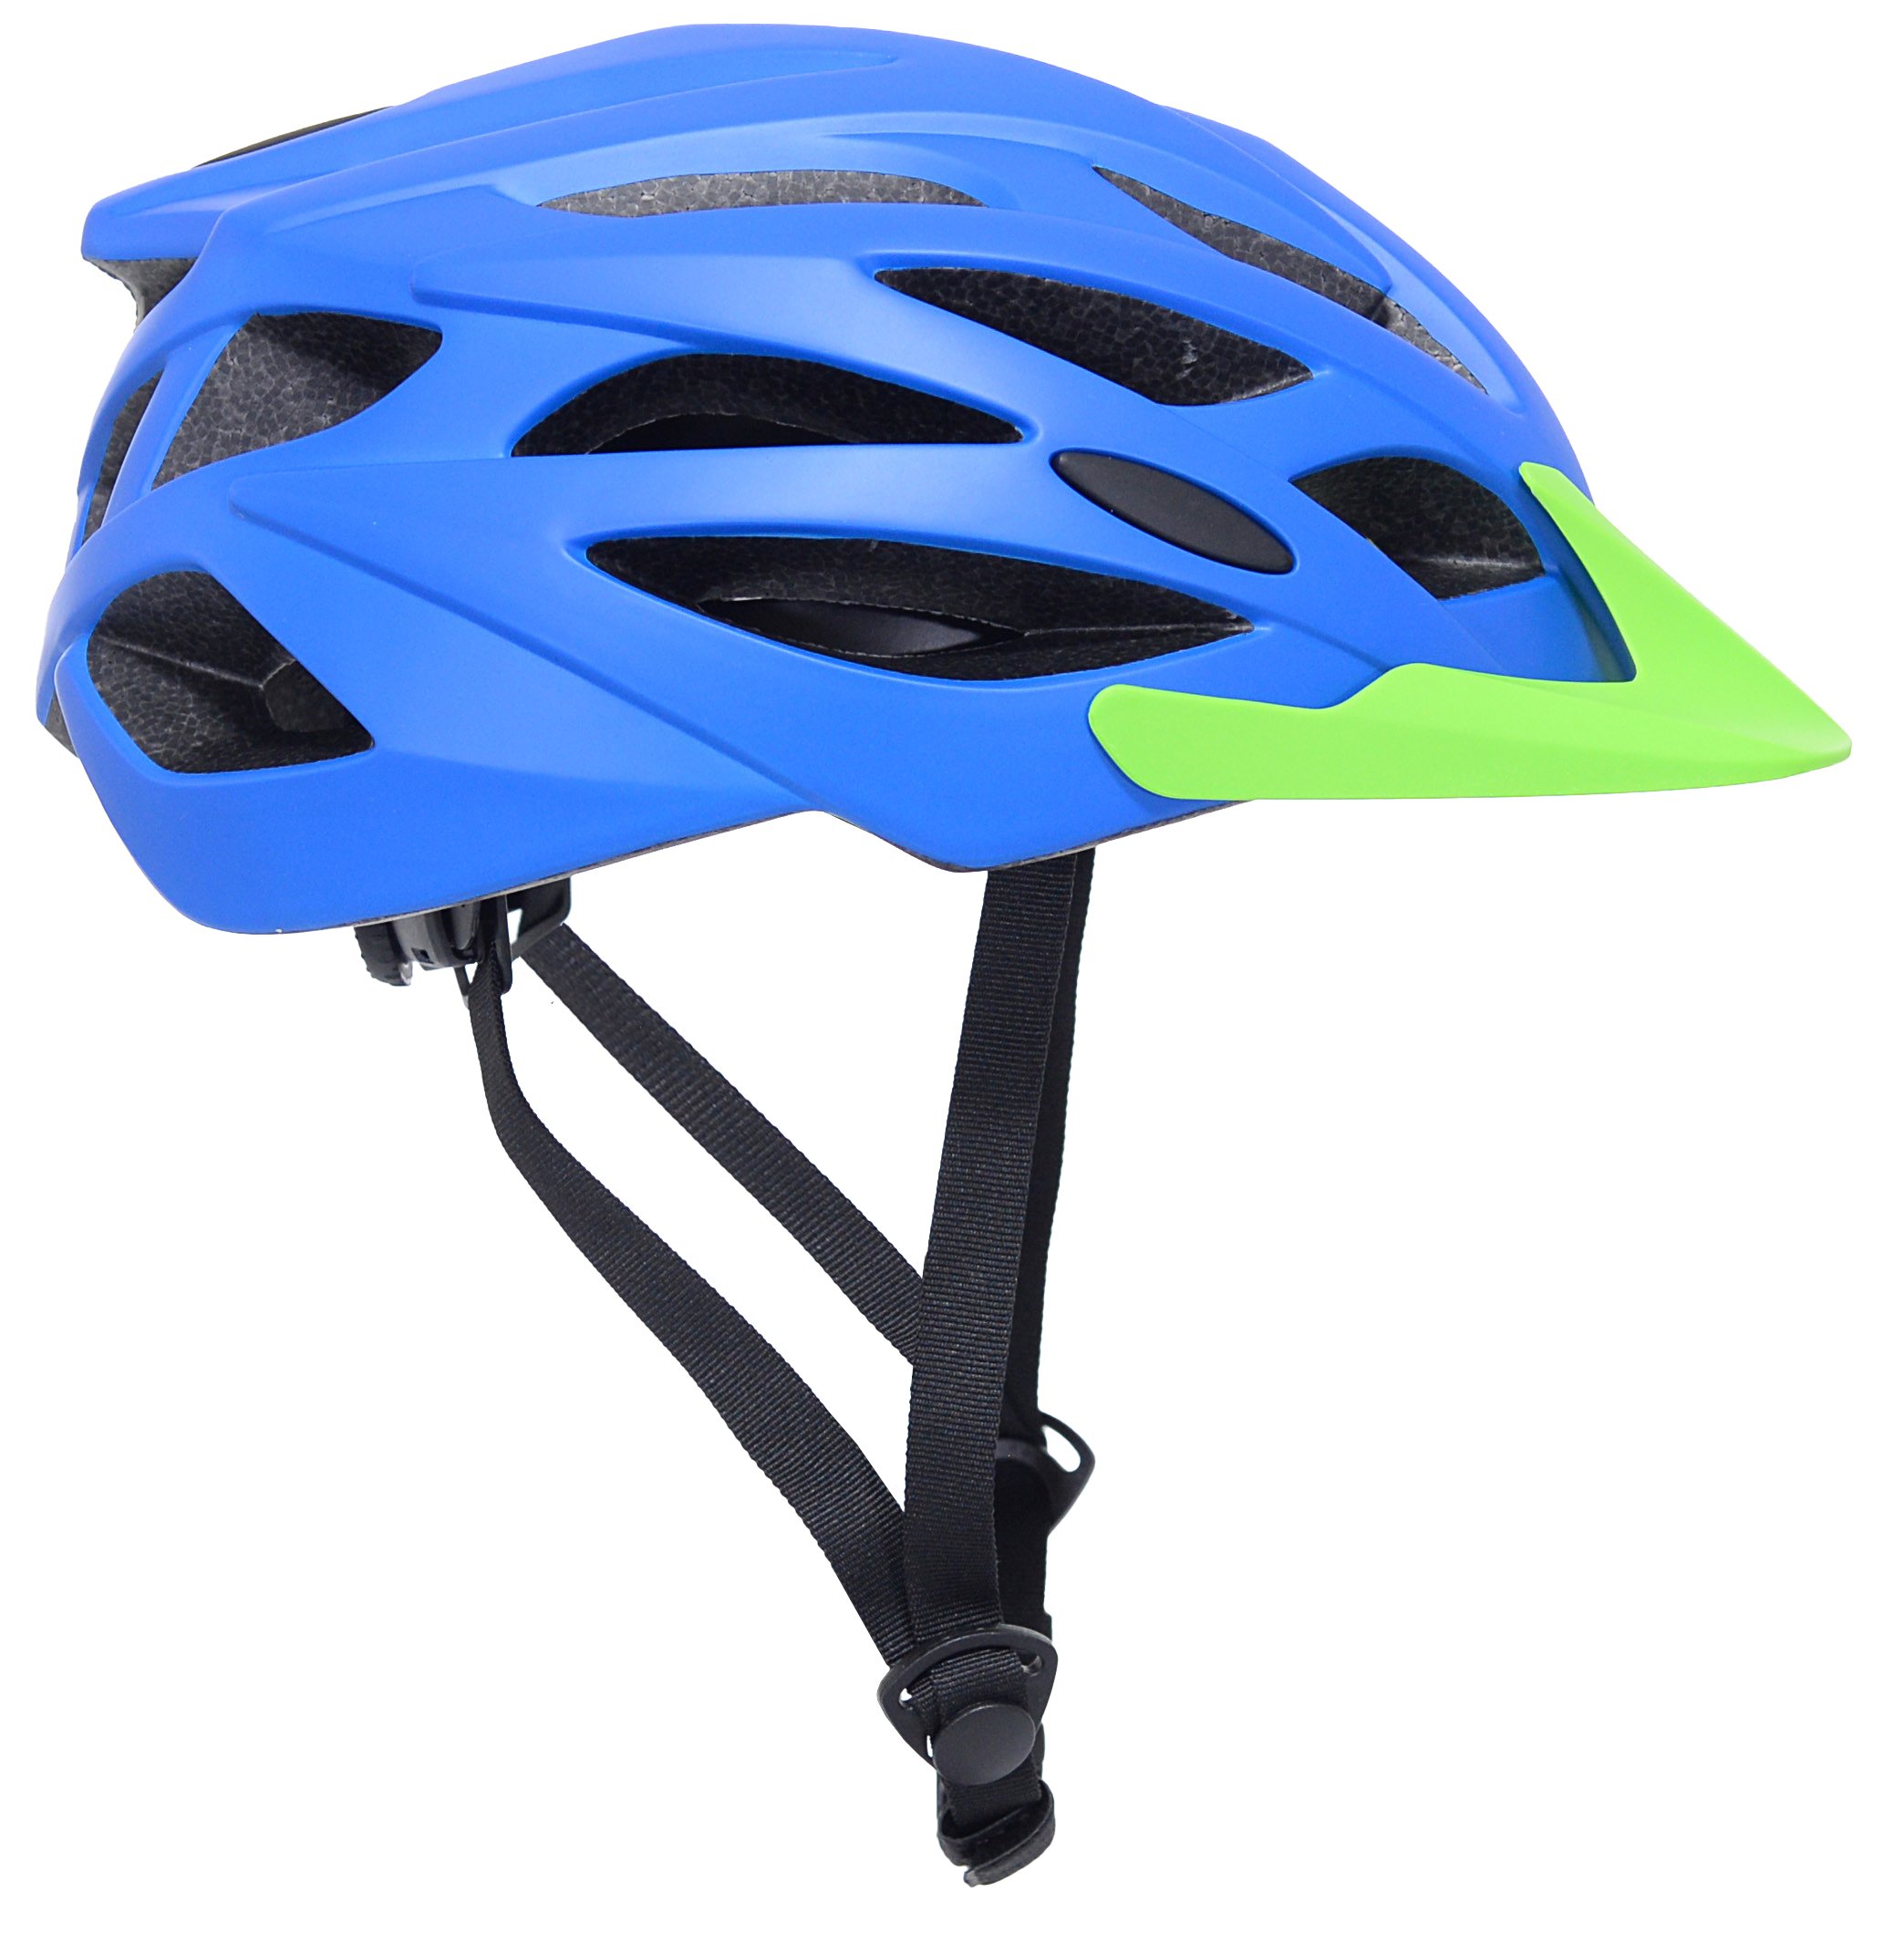 Kent Adult Helmet, Blue and Green with Mesh Liner - image 1 of 6